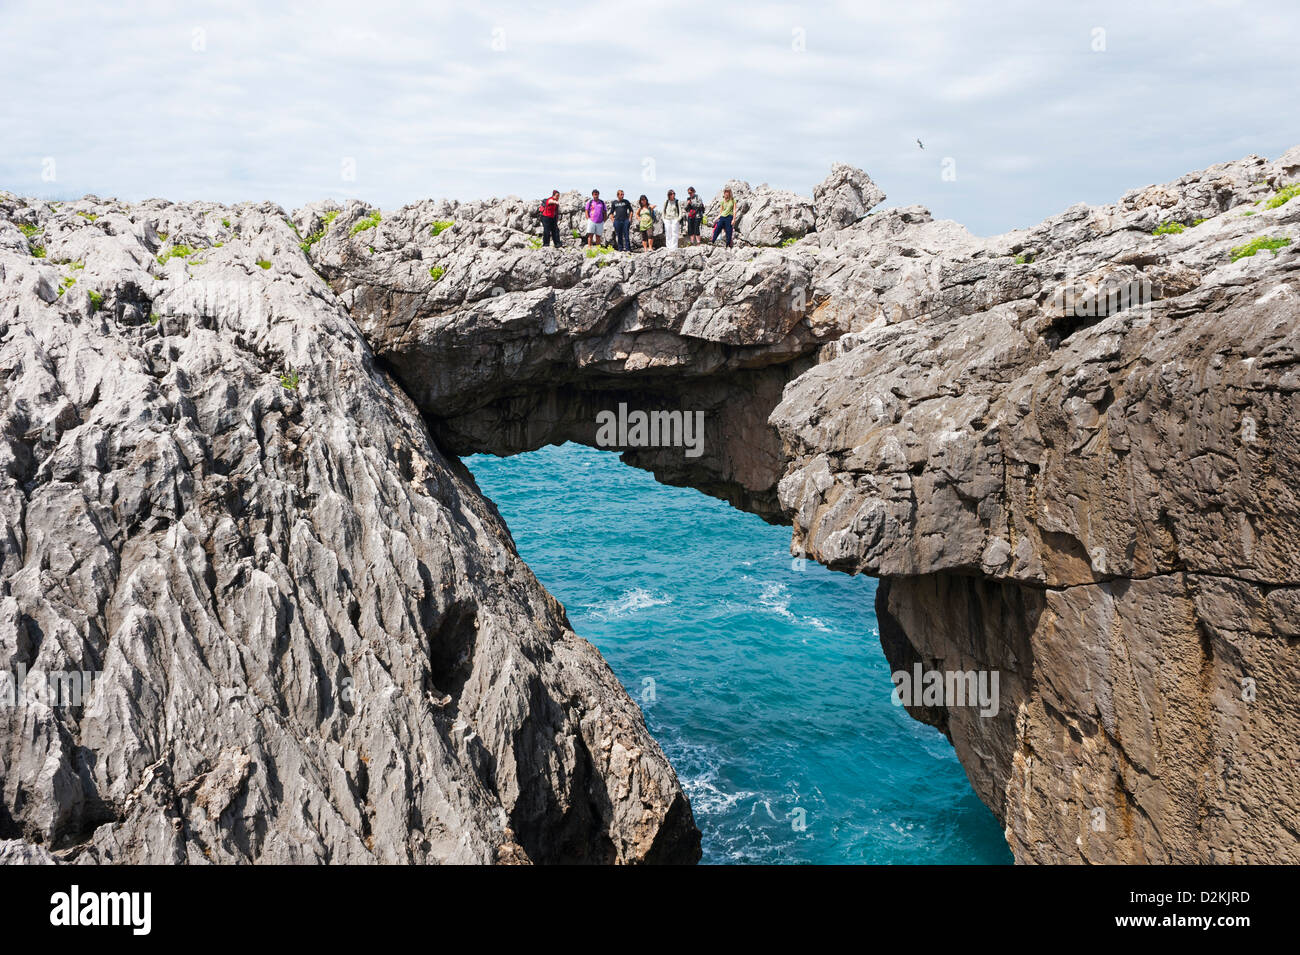 group of people on a natural arch bridge, provinces of Asturias, Spain Stock Photo